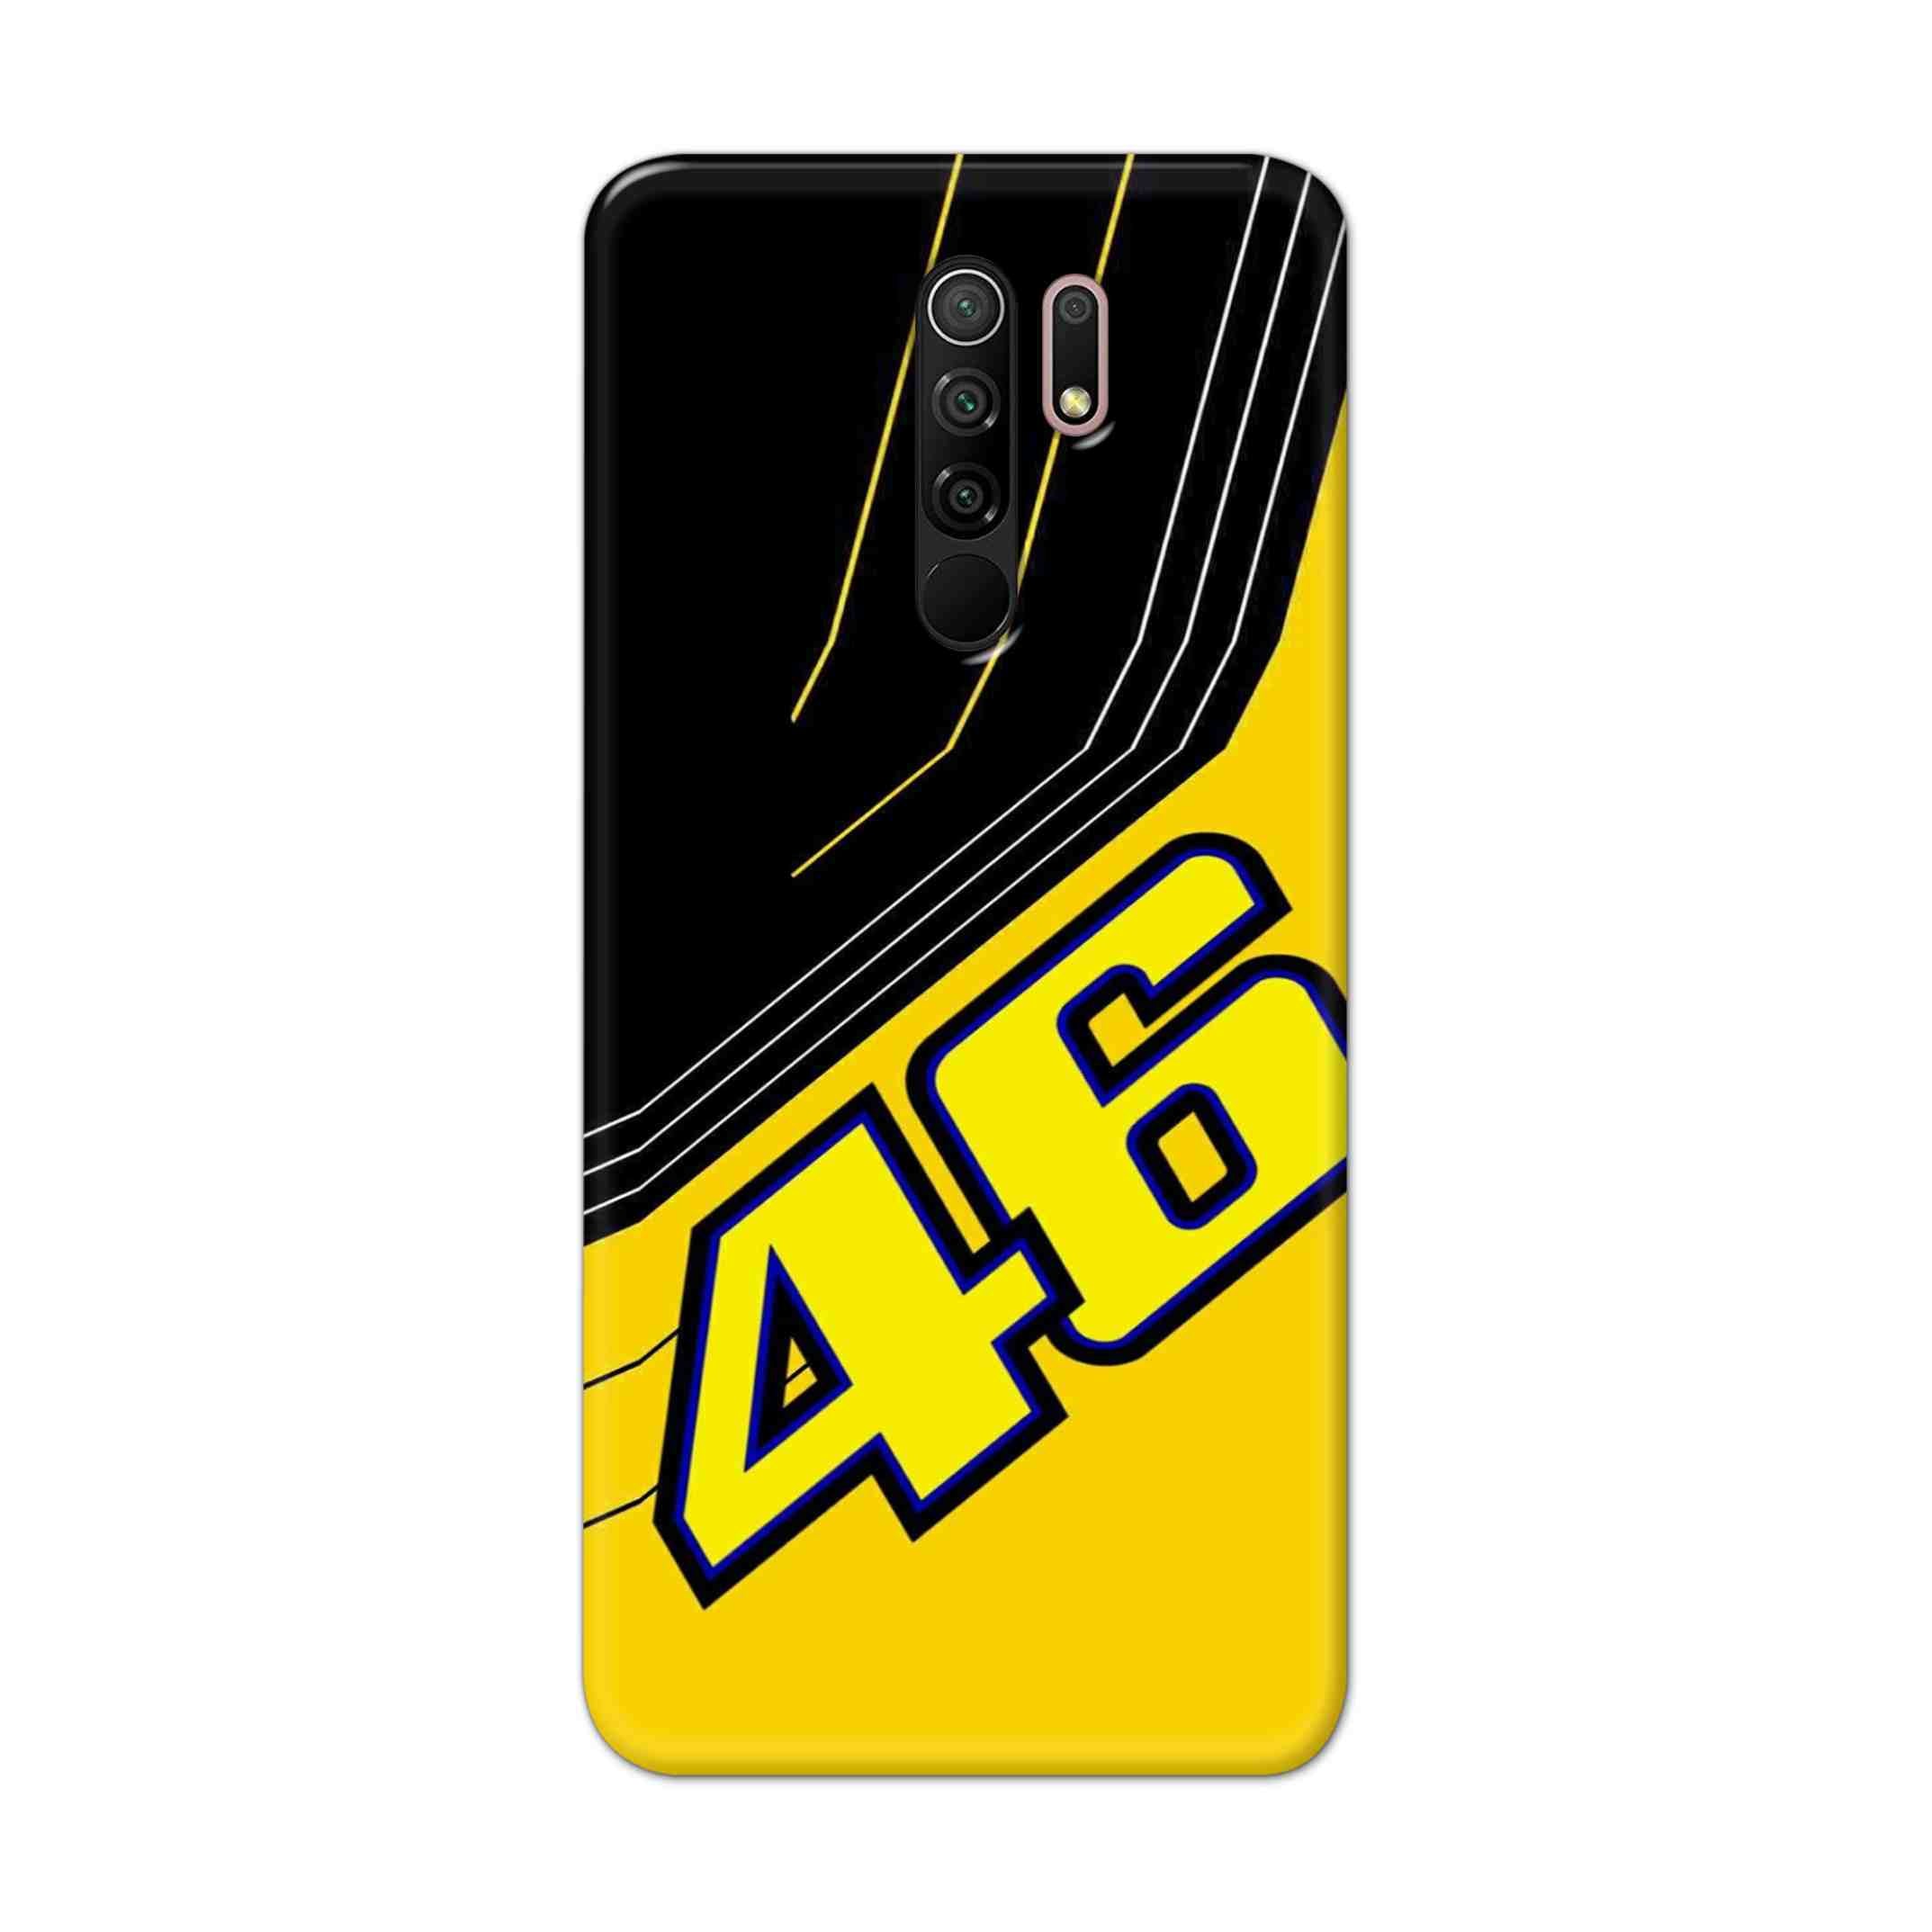 Buy 46 Hard Back Mobile Phone Case Cover For Xiaomi Redmi 9 Prime Online